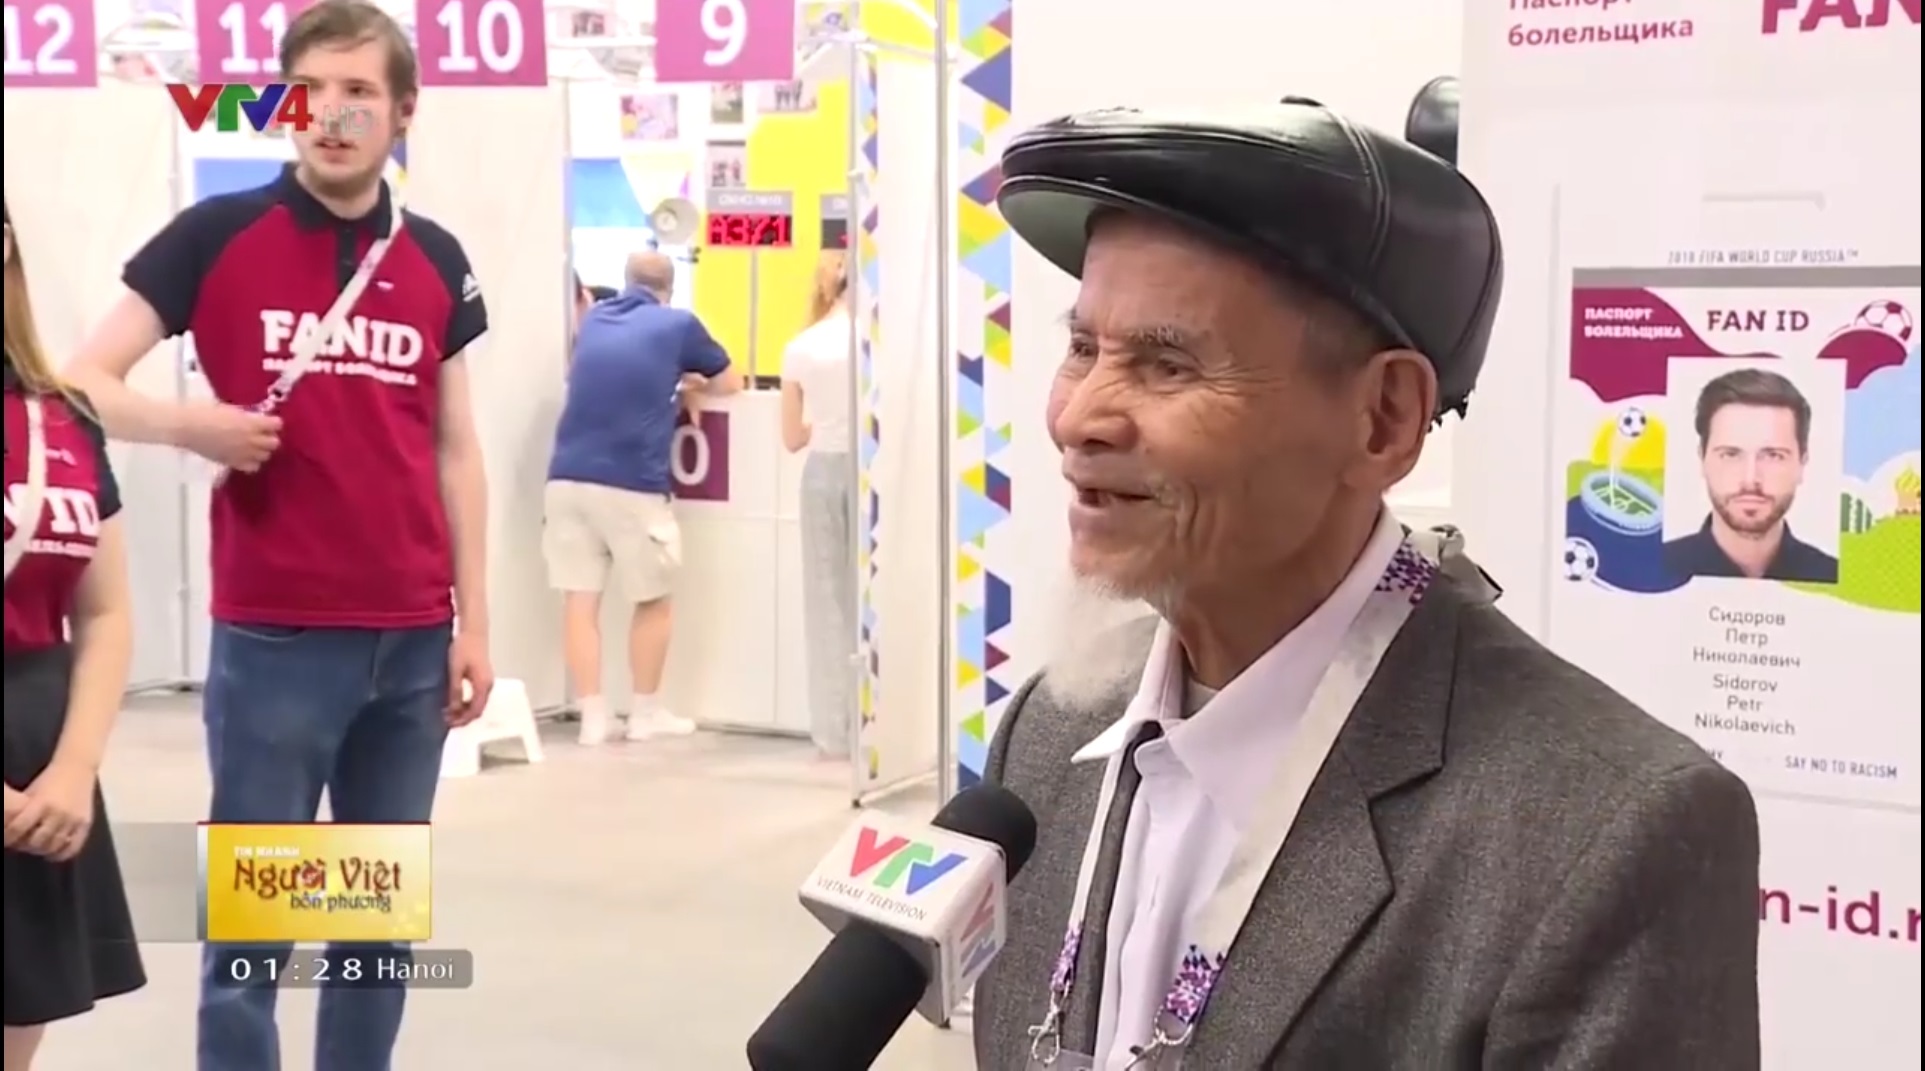 ​95-year-old Vietnamese man oldest fan at 2018 World Cup in Russia